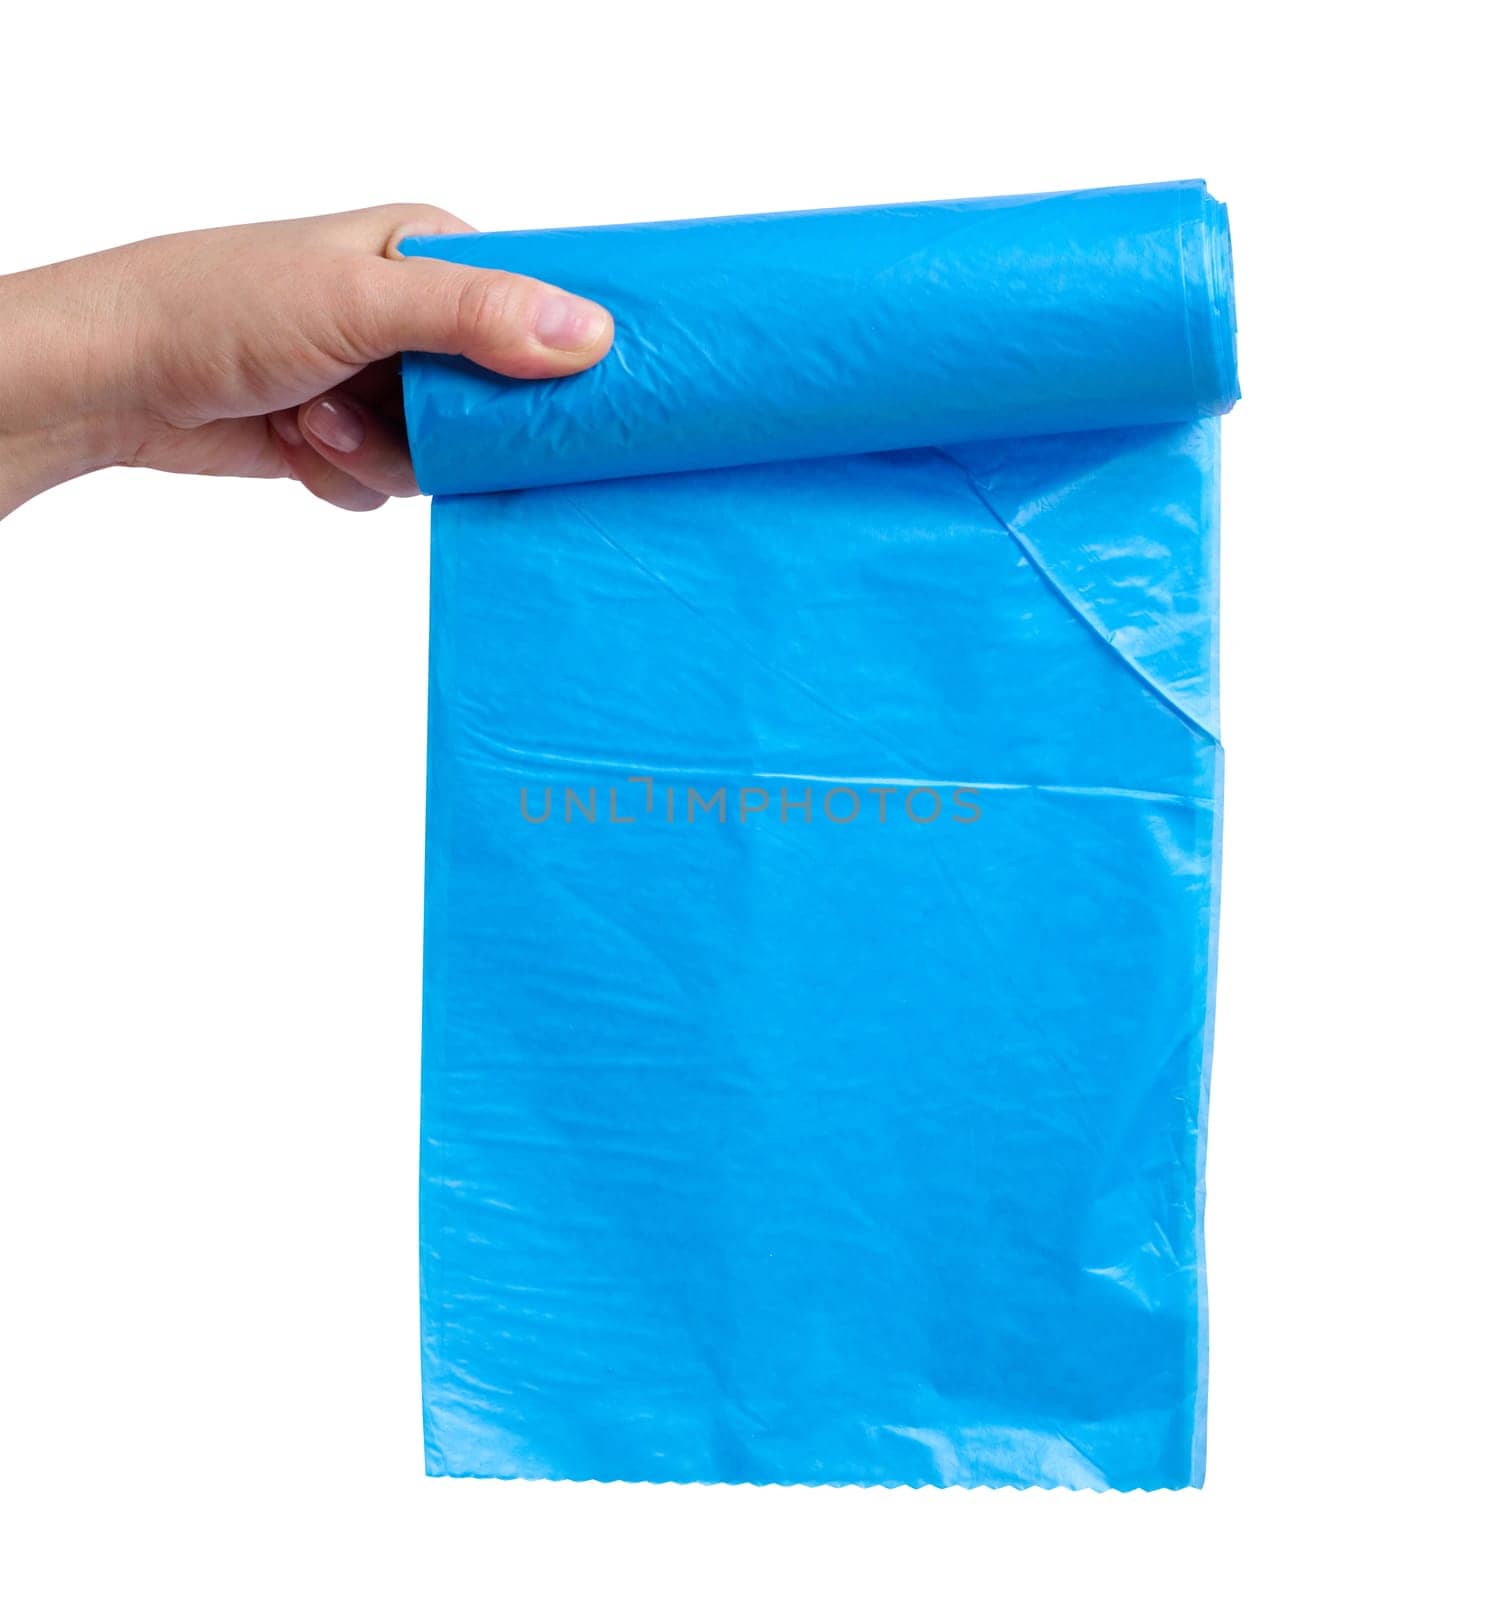 A woman's hand holds a roll of plastic bags for the trash can on a white isolated background